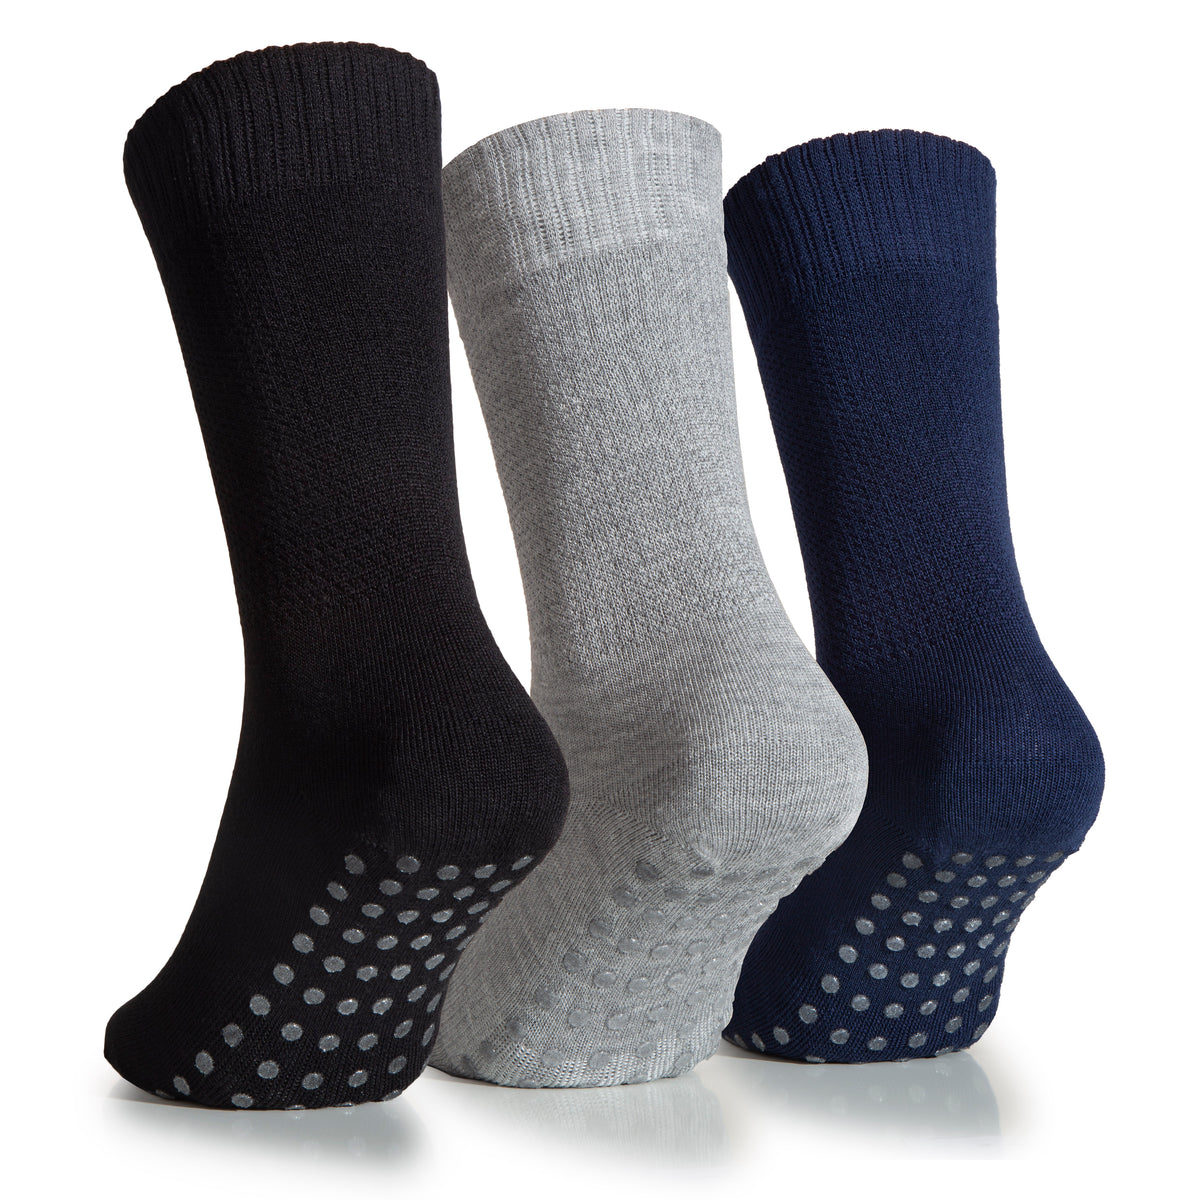 Image of three pairs of Women's Bamboo Diabetic Ankle Socks with Non Slip Grip. The socks come in black, grey, and blue and have dots on the bottom.